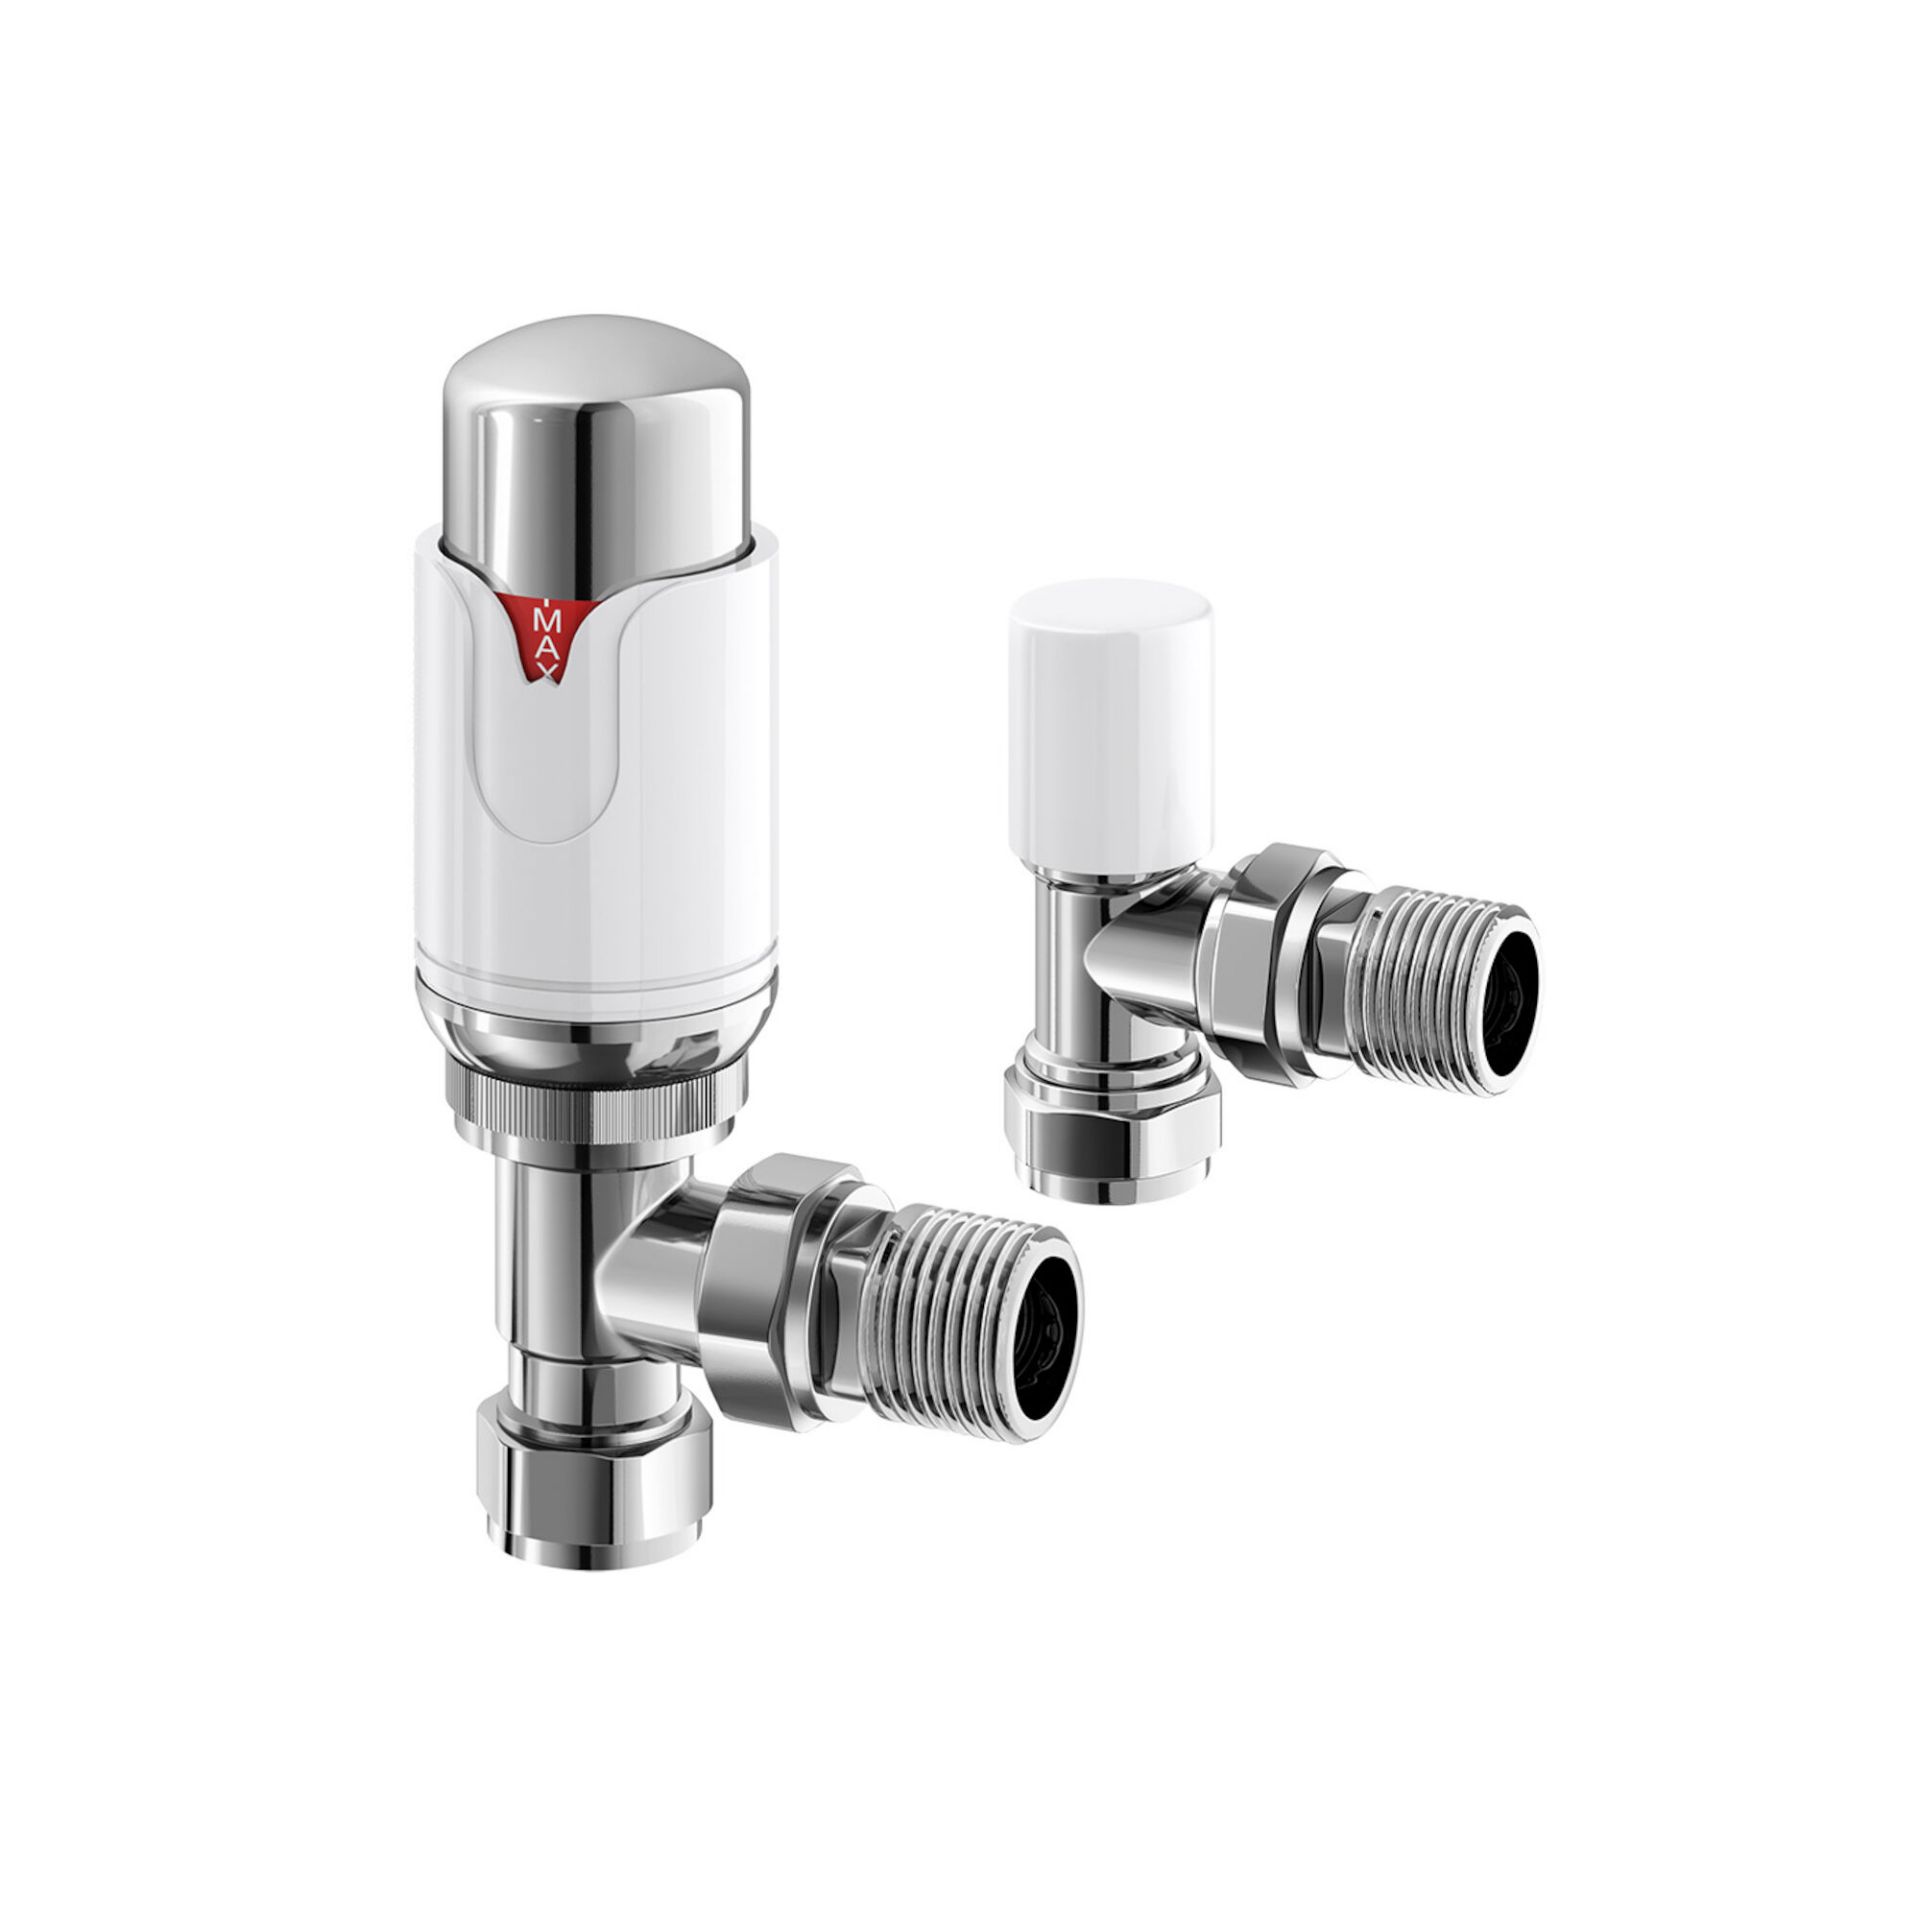 (MP60) 15mm Standard Connection Thermostatic Angled Gloss White & Chrome Radiator Valves Solid brass